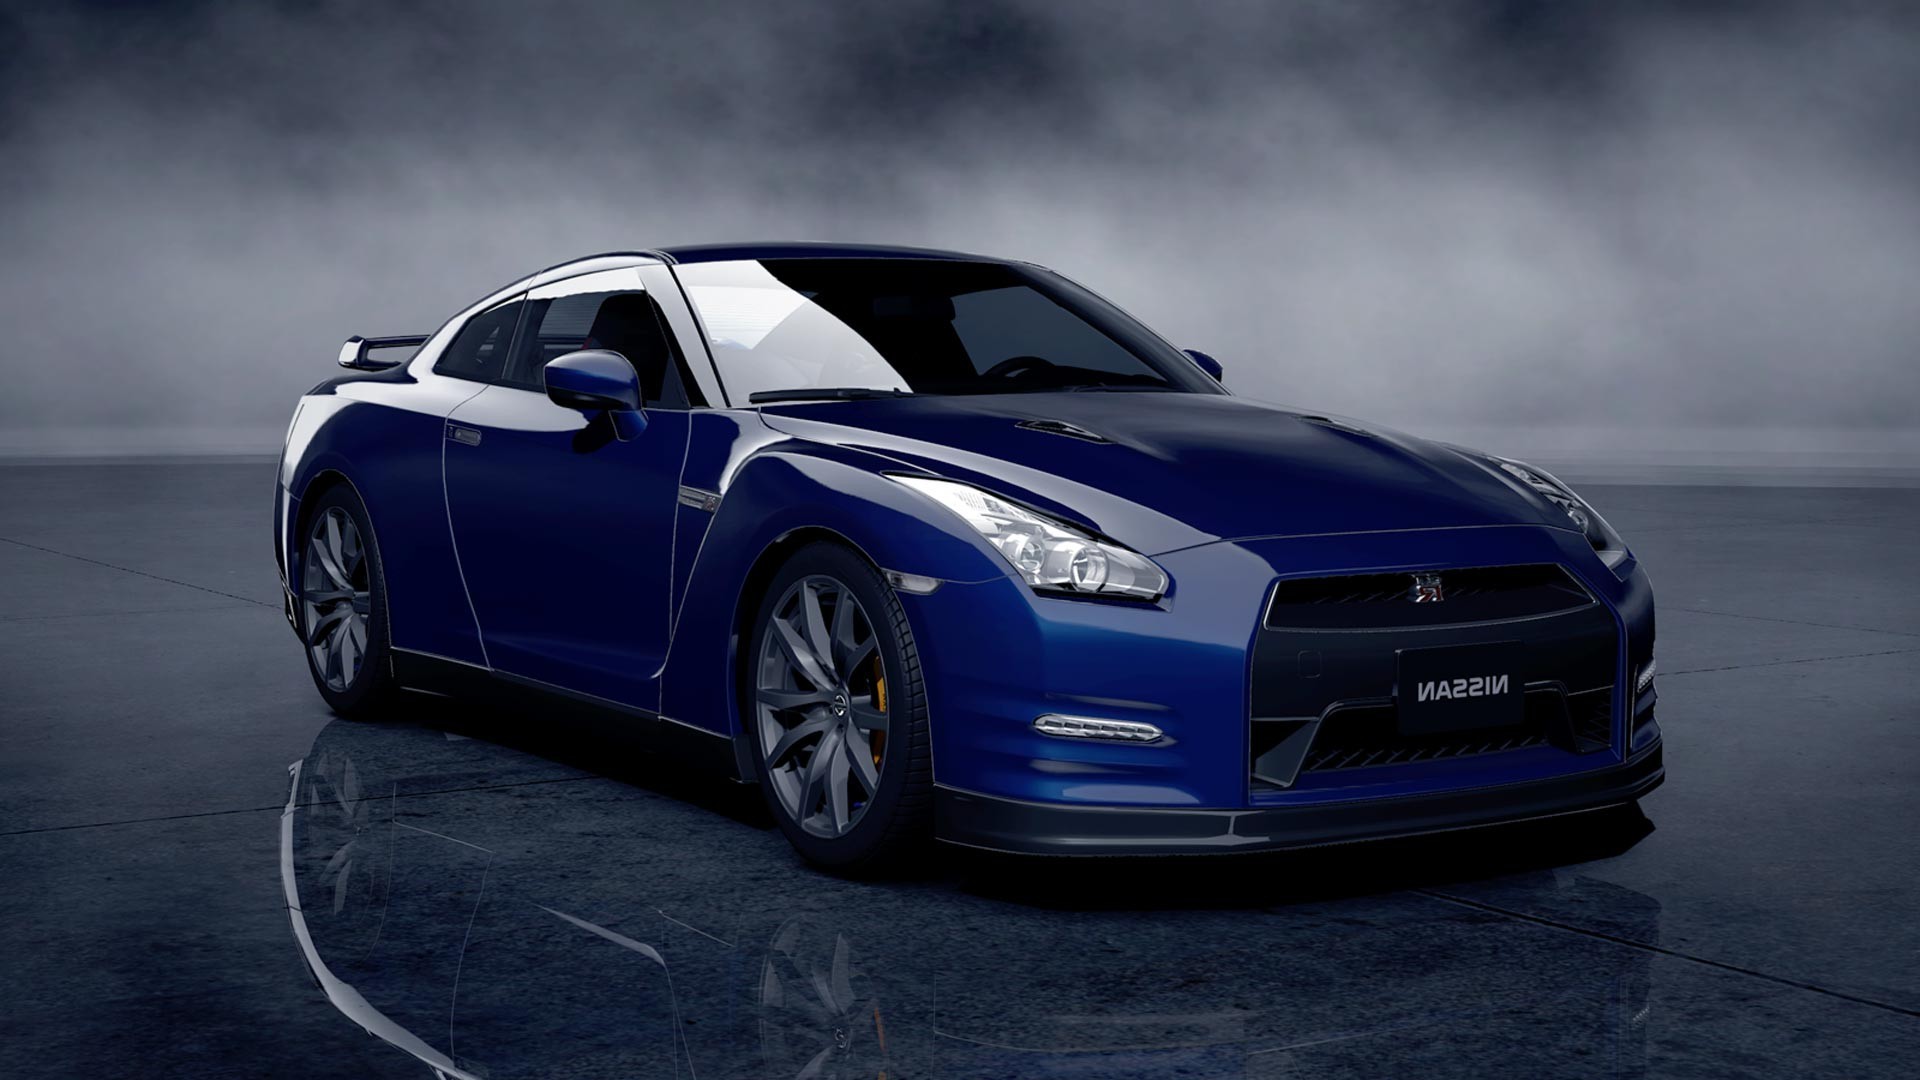 Game Wallpapers » Nissan Gt R, Nissan Skyline Gt R - Nissan Gt-r - HD Wallpaper 